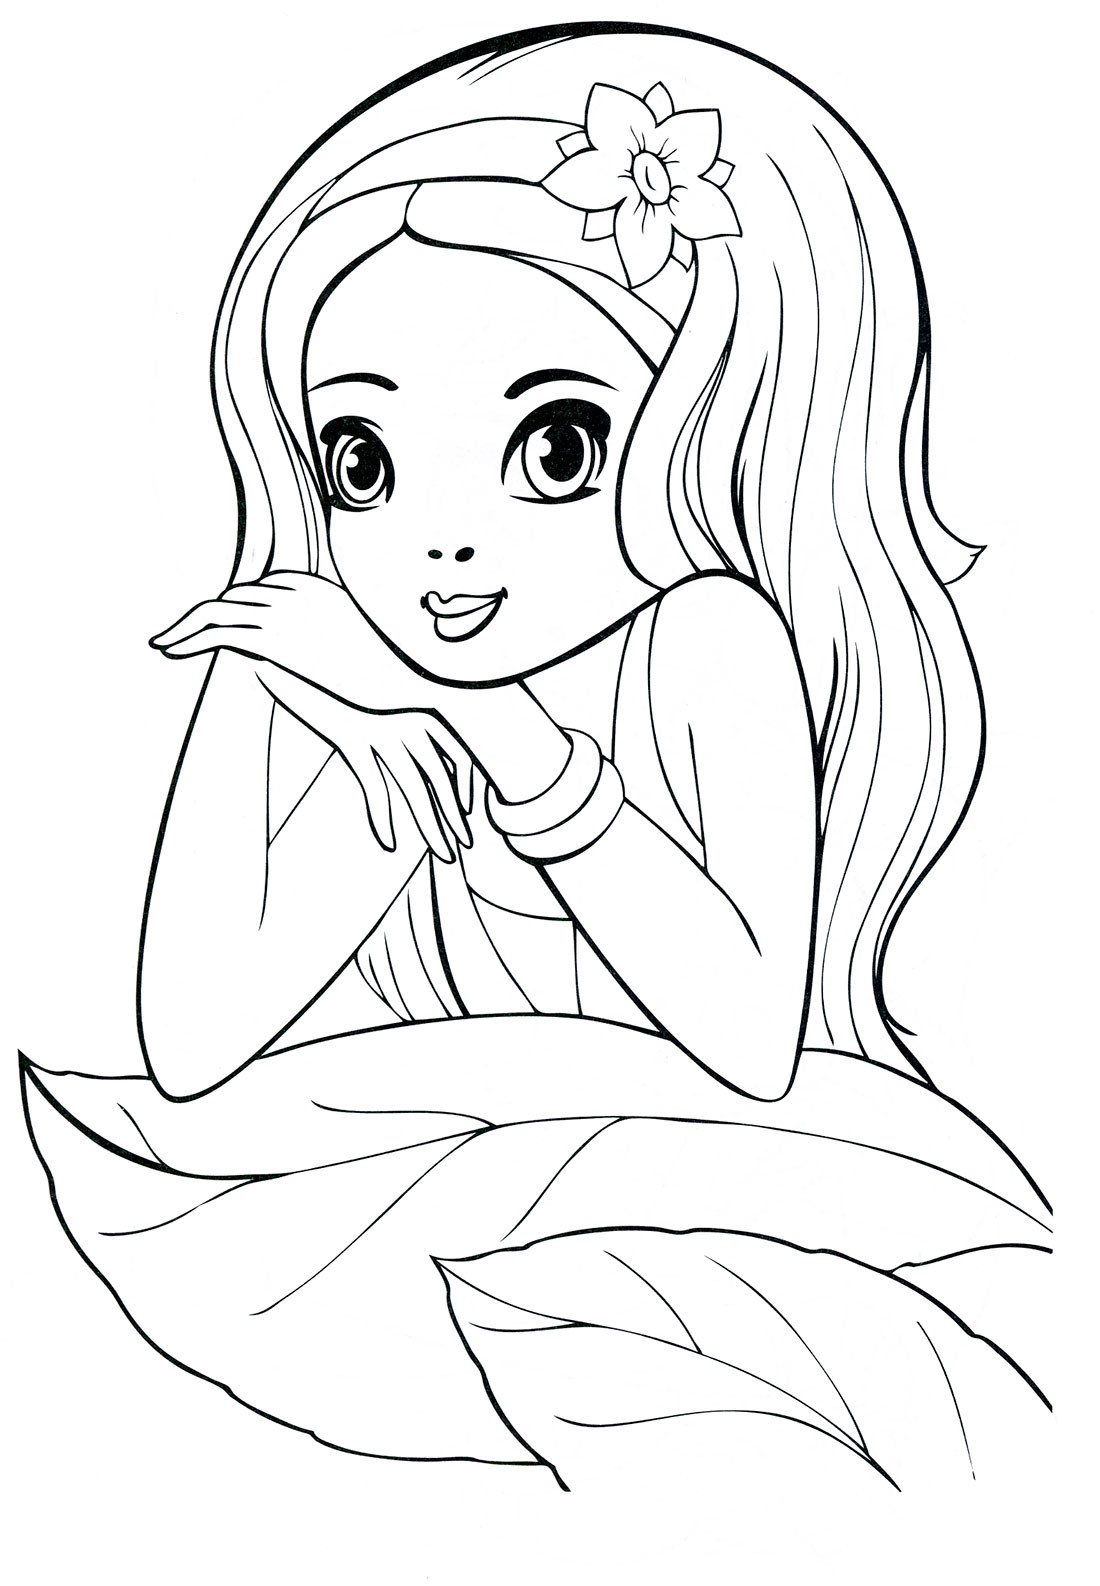 Coloring Sheets For Girls 8 10
 Coloring pages for 8 9 10 year old girls to and